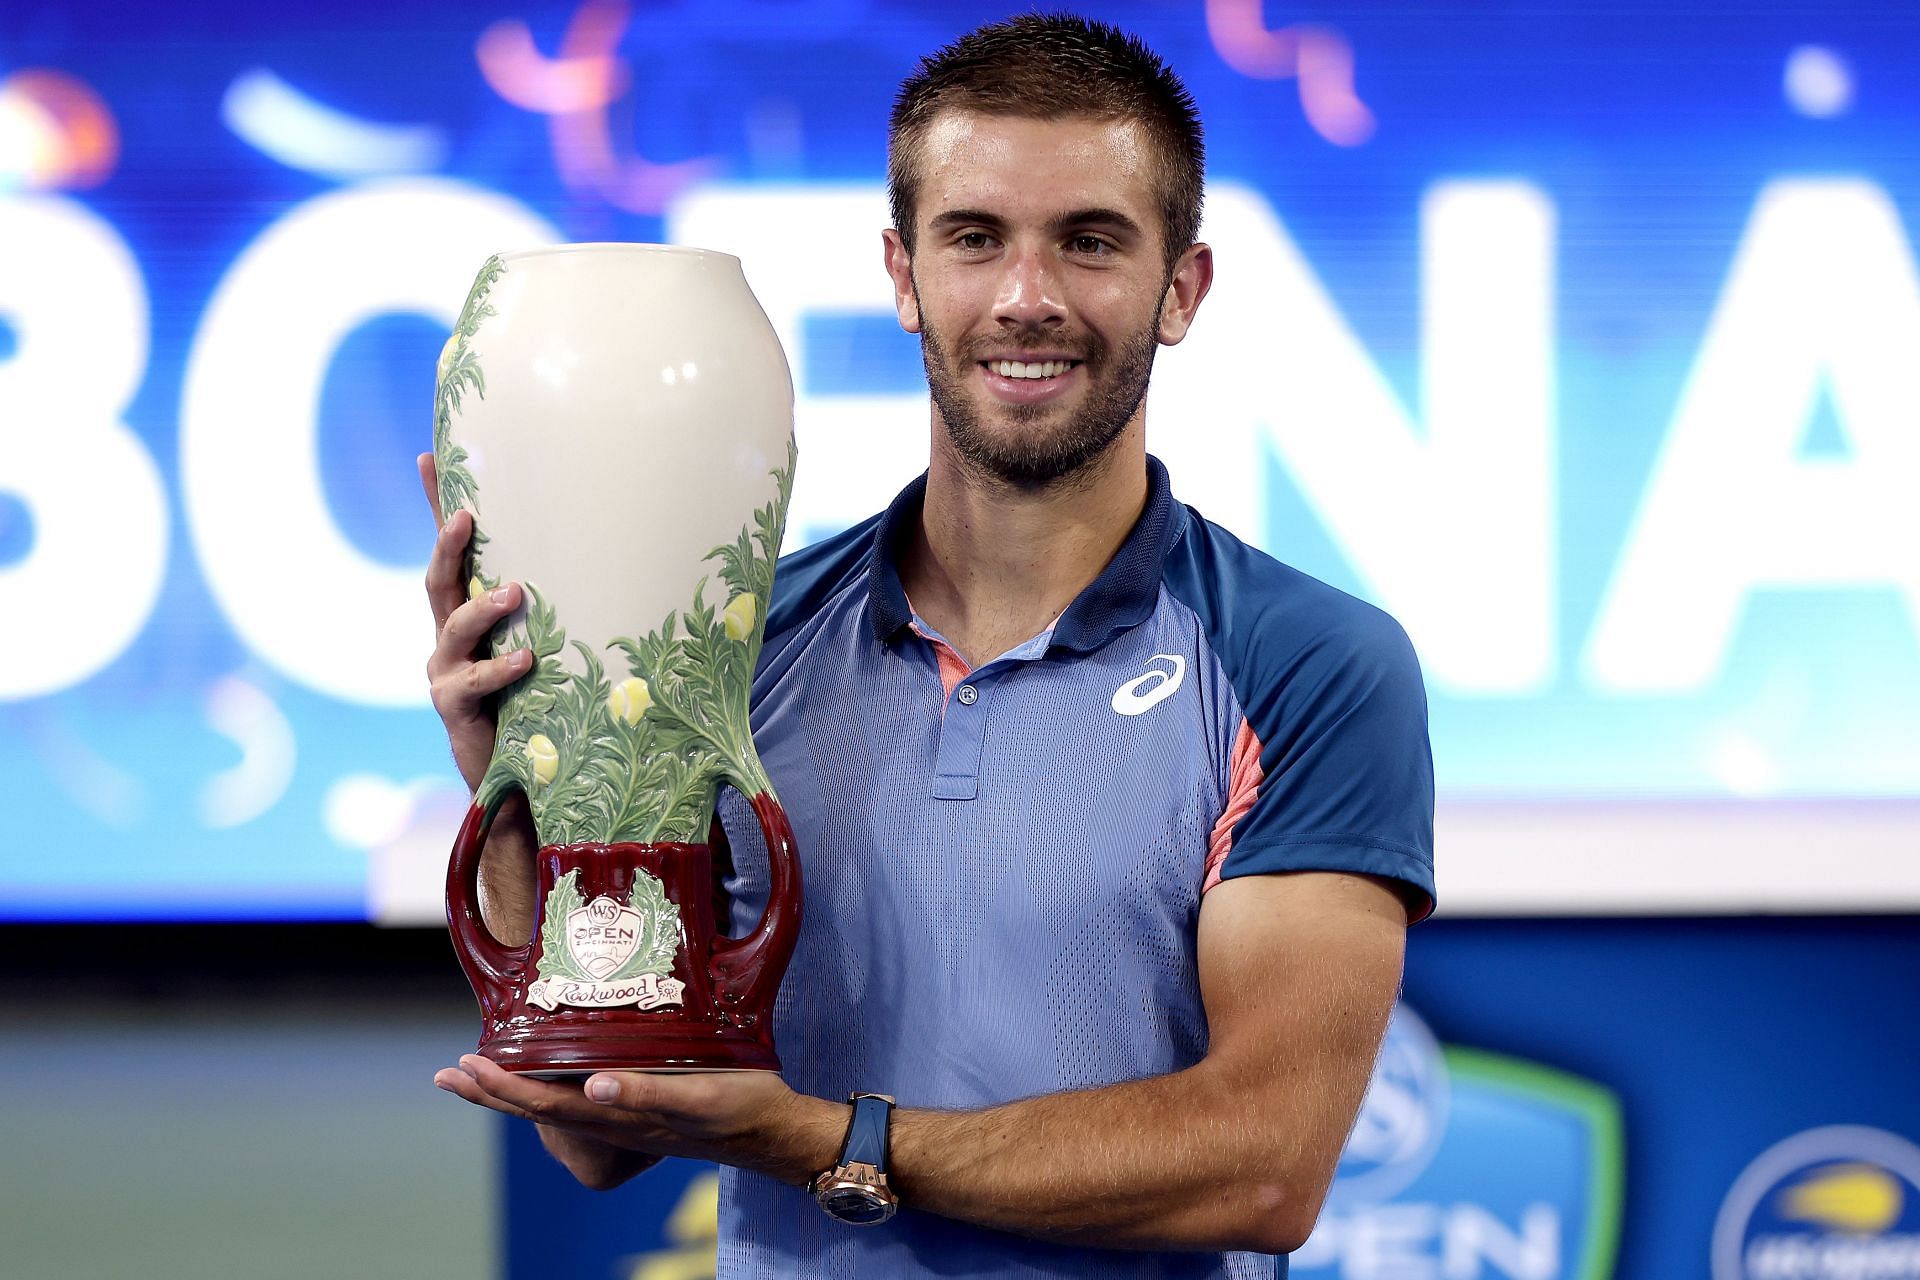 Borna Coric at the 2022 Western and Southern Open